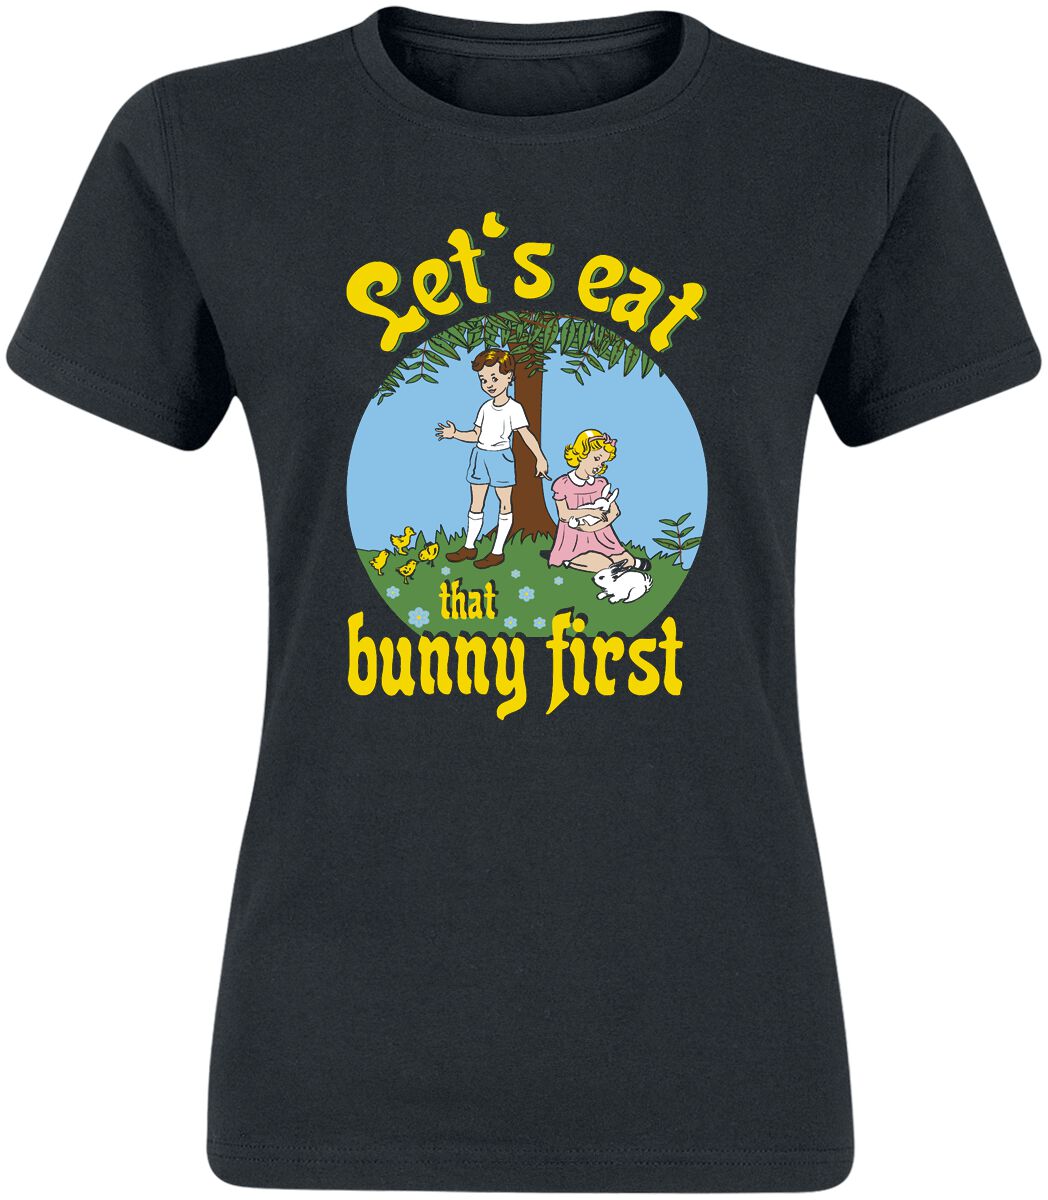 Slogans Let's Eat That Bunny First T-Shirt black